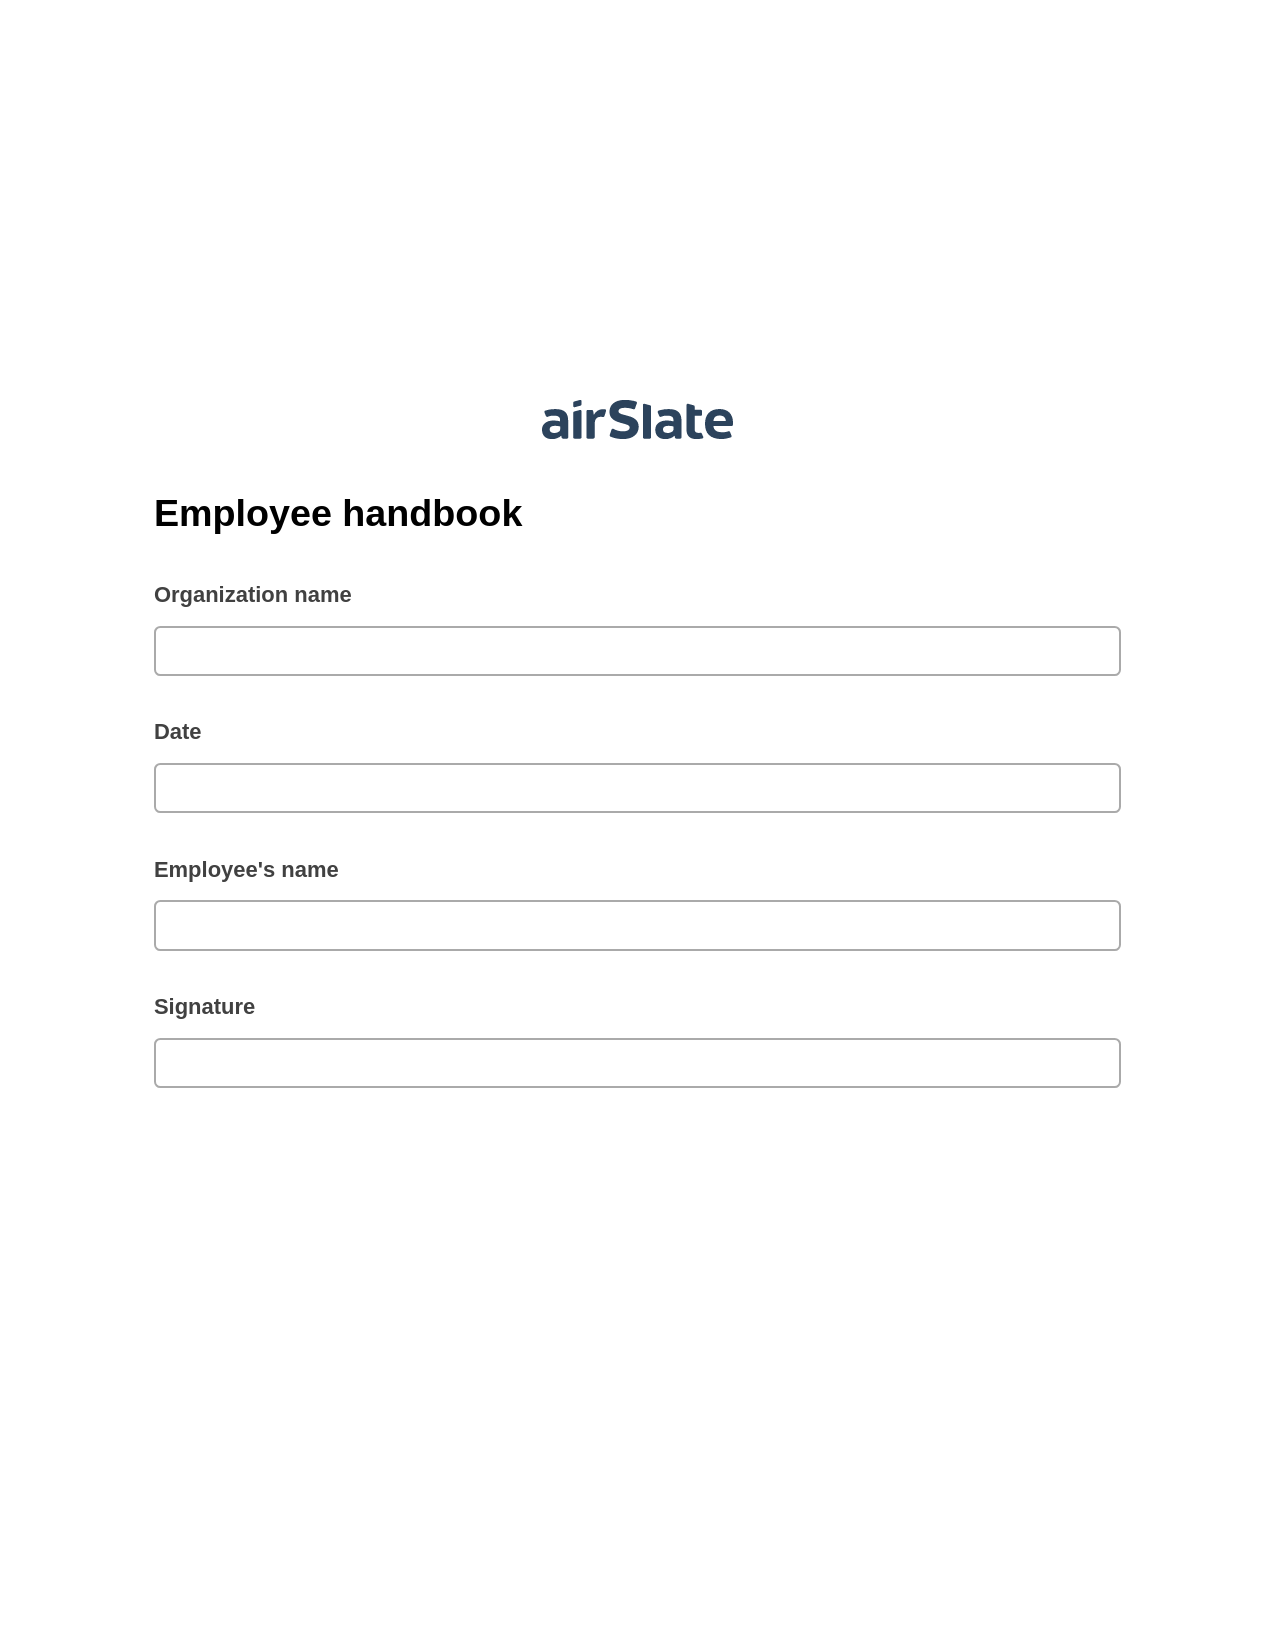 Employee handbook Pre-fill from CSV File Bot, Send Mailchimp Campaign Bot, Text Message Notification Postfinish Bot